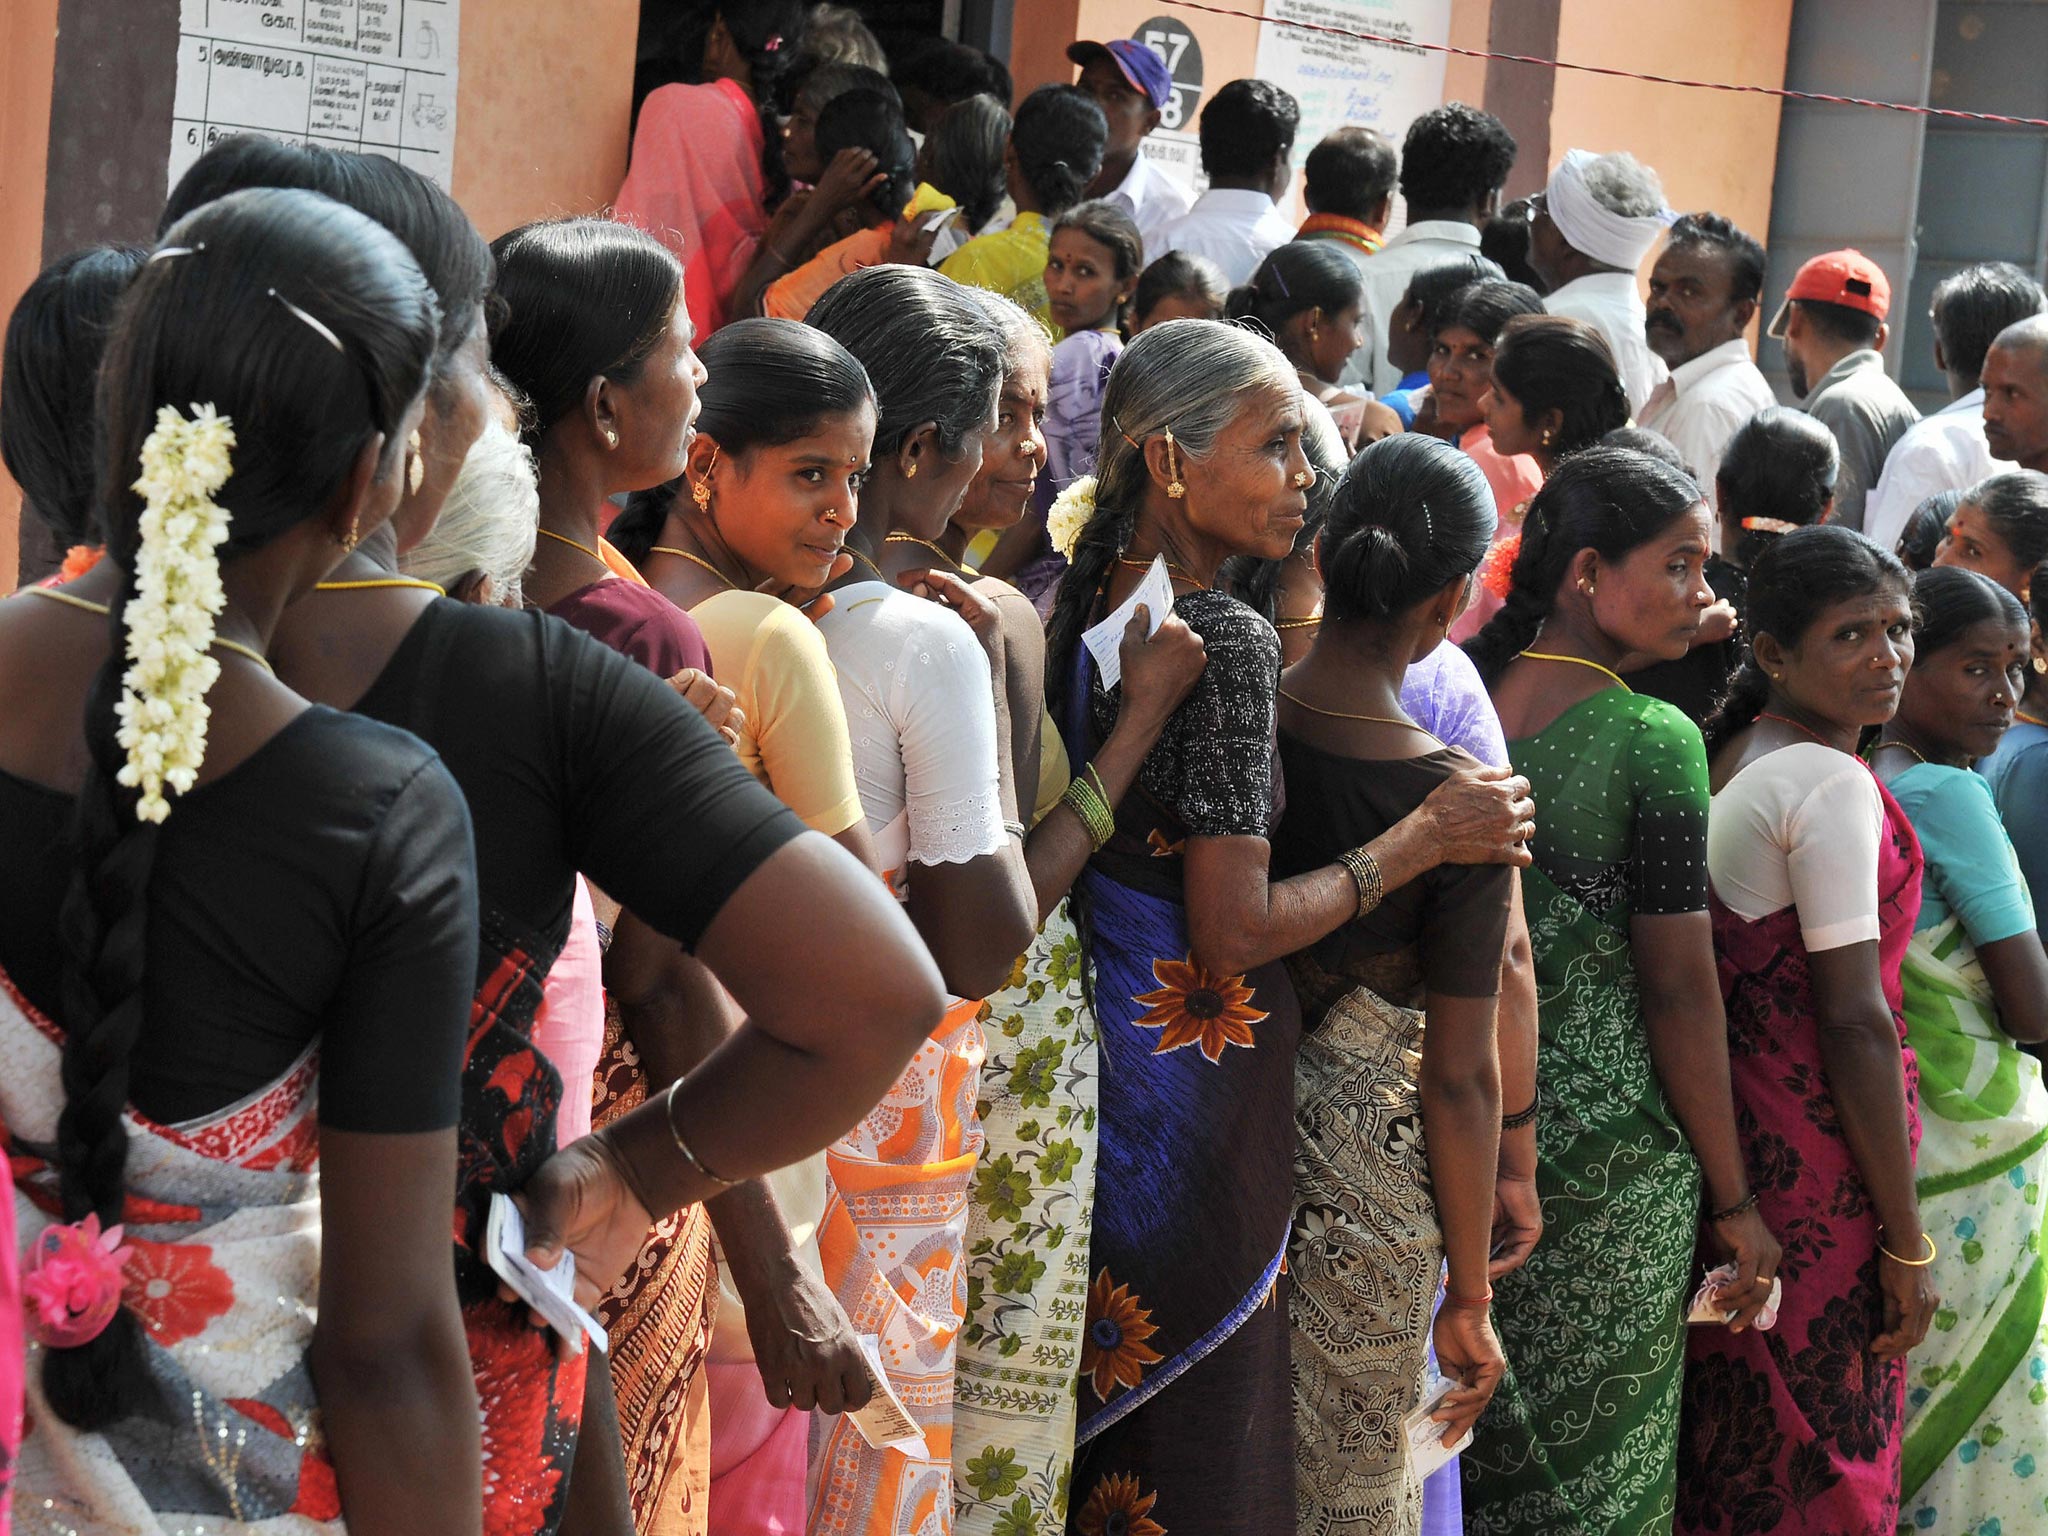 Indian women queue outside an election polling booth. Just under 390 million women are registered to vote in the coming general election